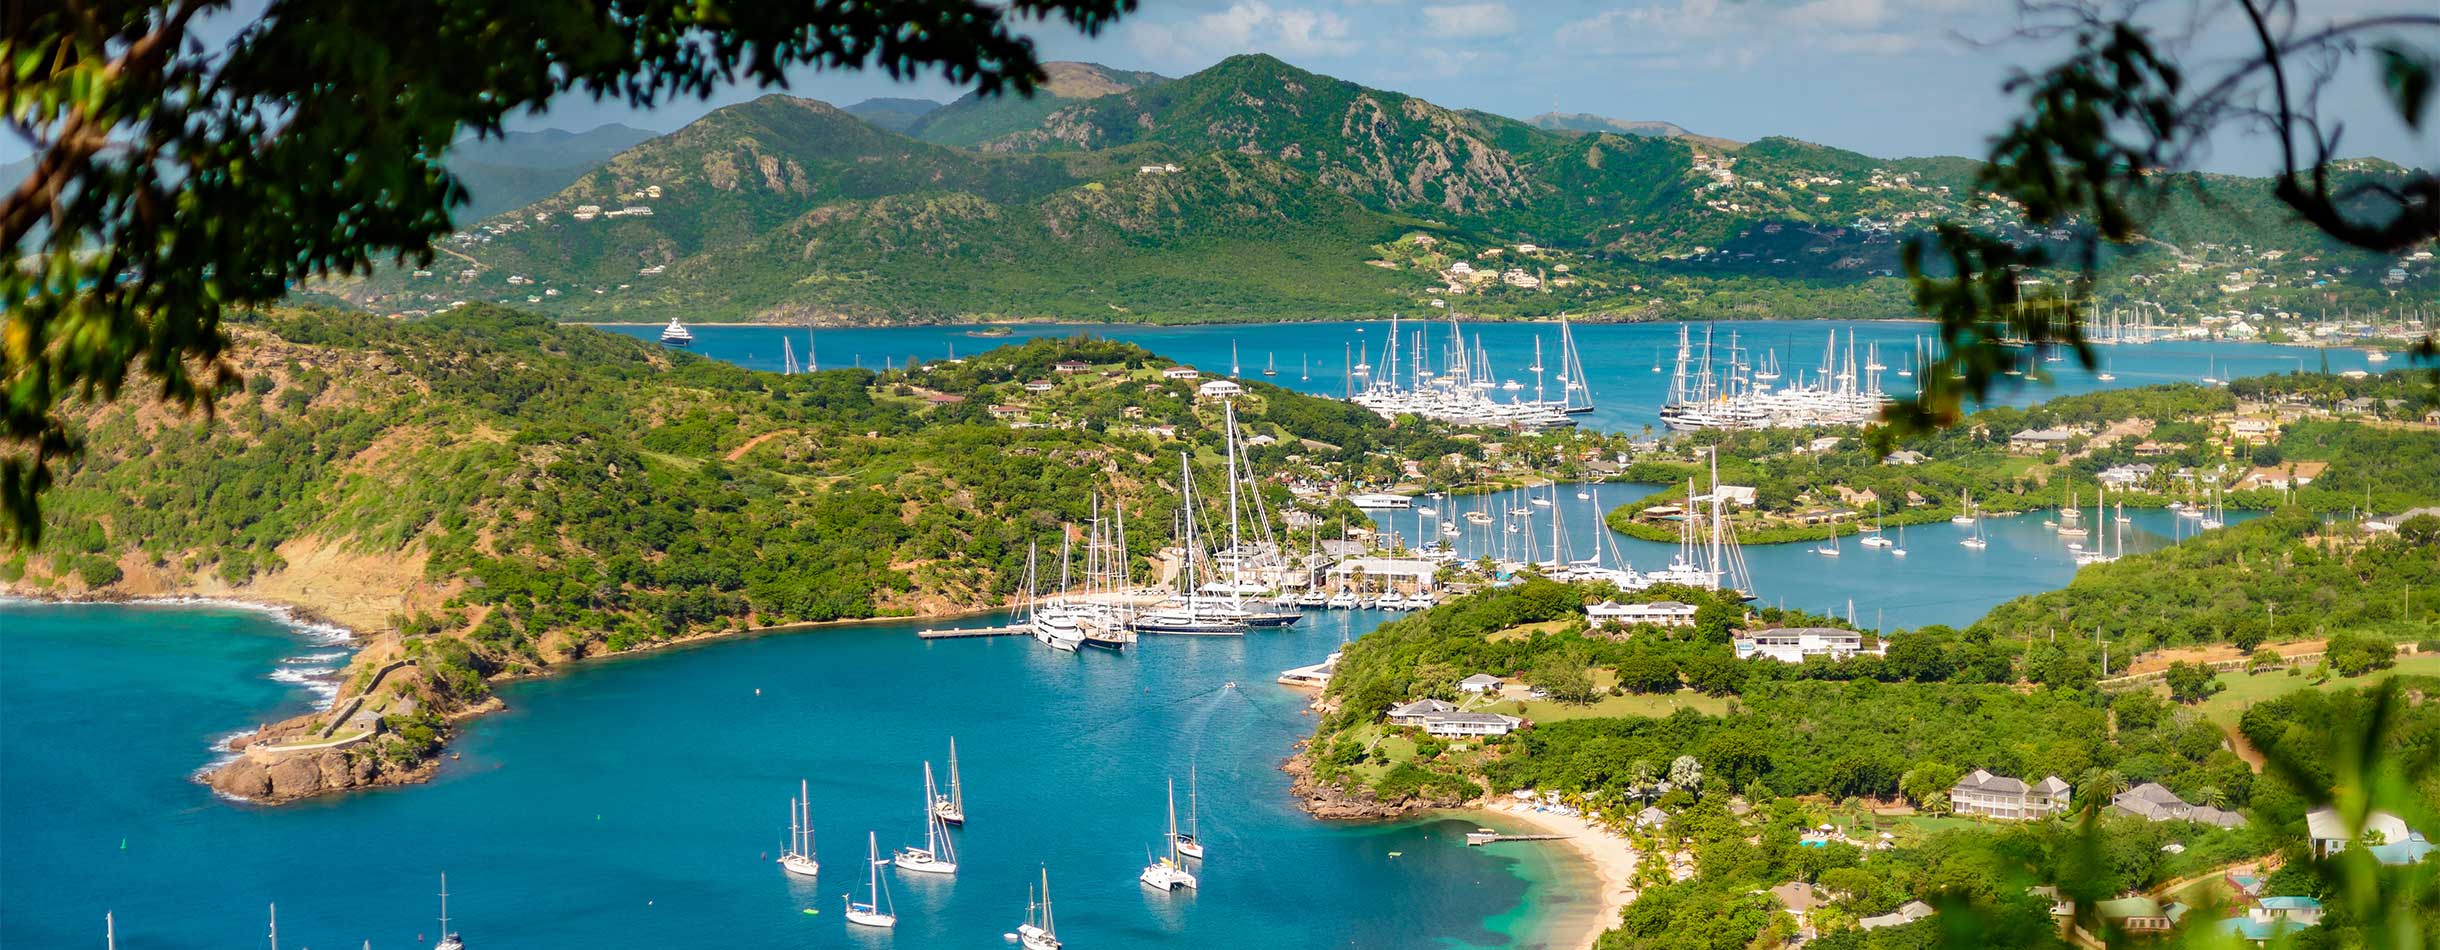 English harbour and Nelsons Dockyard in Antigua and Barbuda